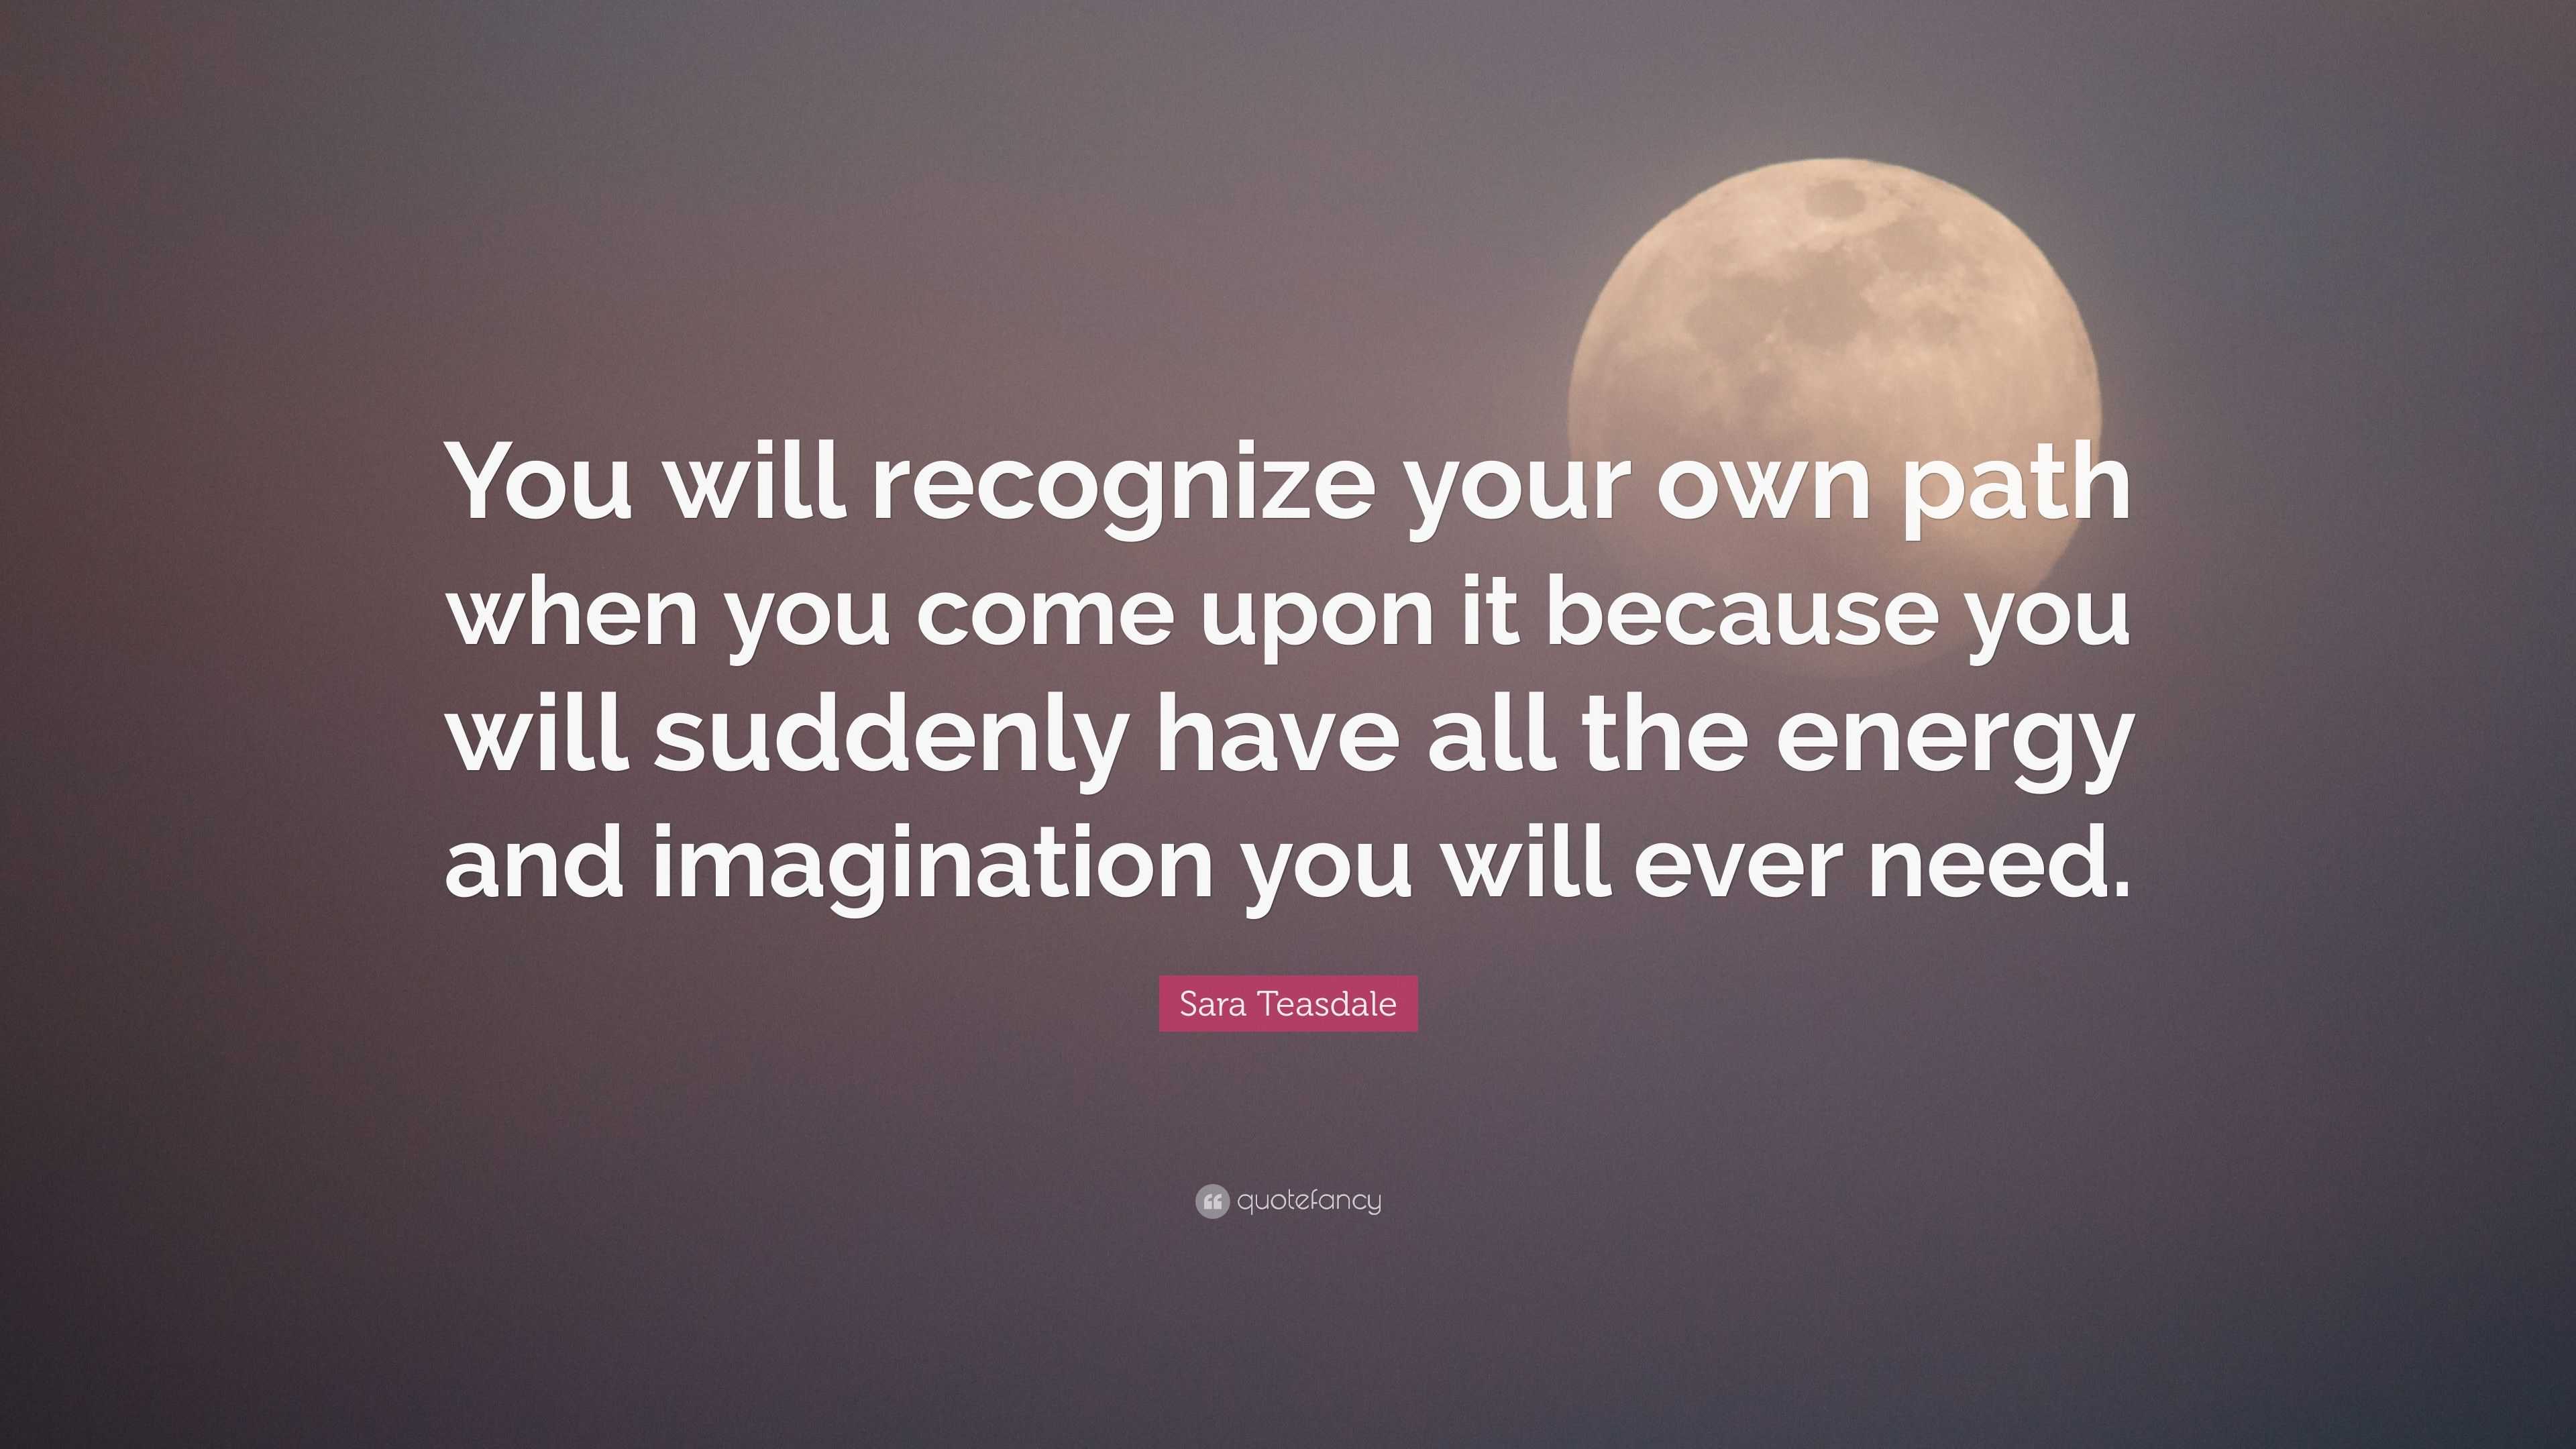 Sara Teasdale Quote: “You will recognize your own path when you come ...